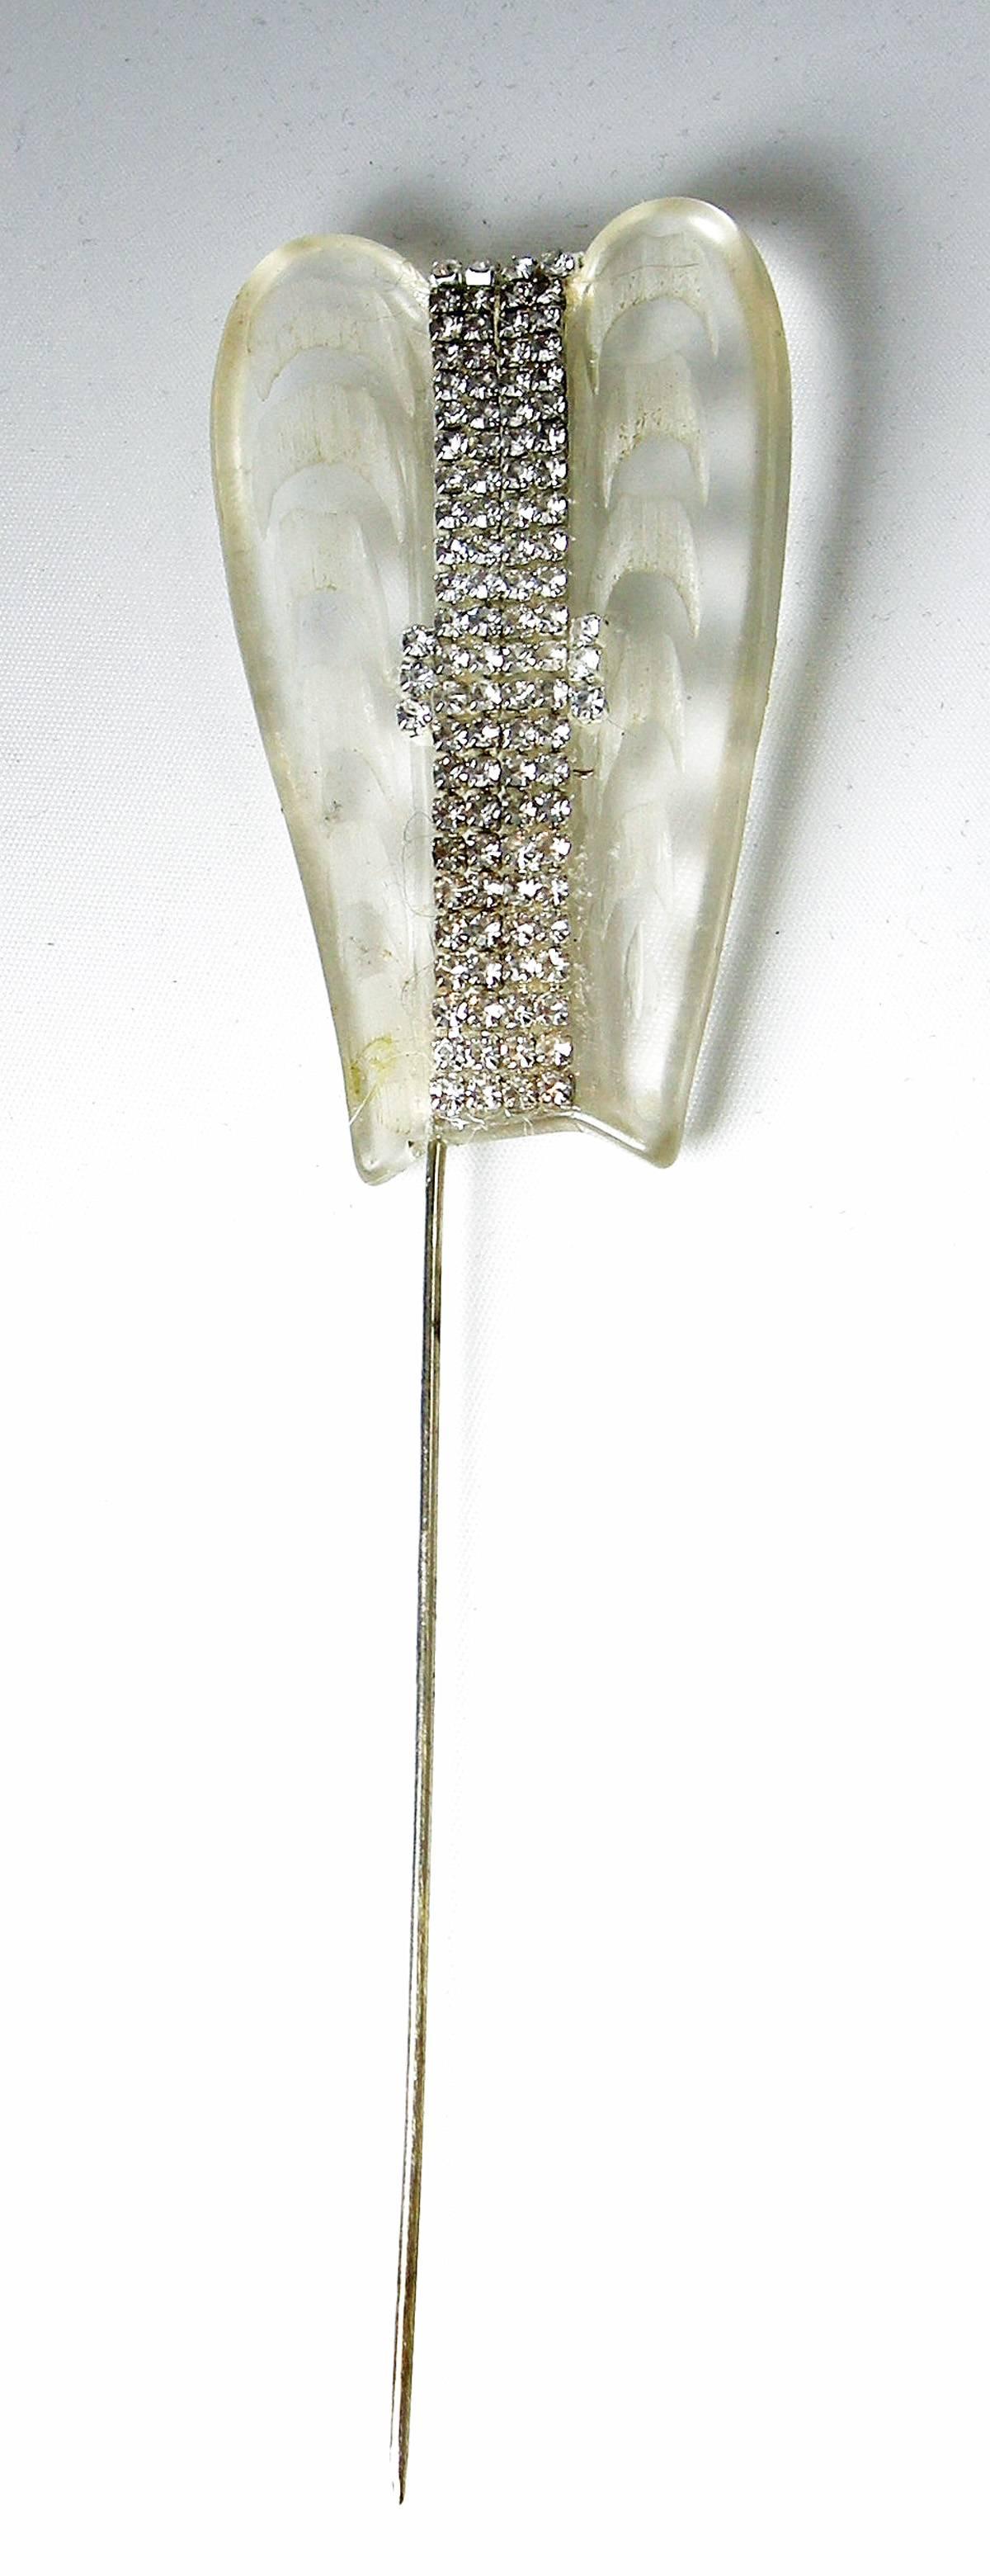 This is a special rare find of a Deco hat pin made of Celluloid with pave set rhinestones in the center. It is a classic deco design and calls your immediate attention.  This pin measures 5-1/2” x 1-1/2” and is in excellent condition.